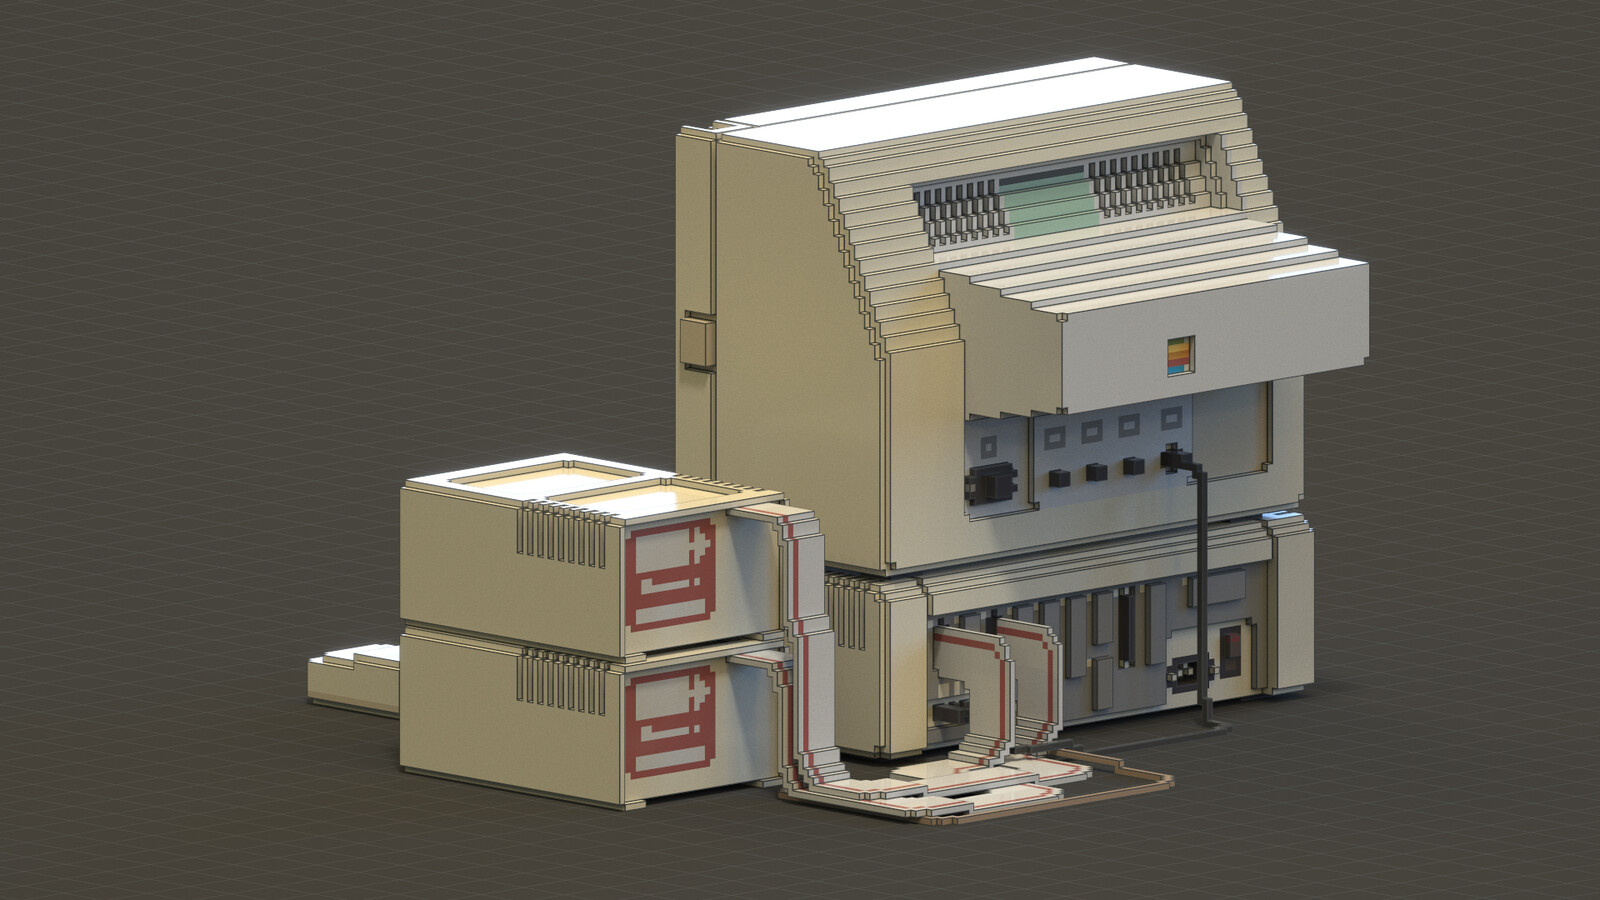 Rendering of a voxel Apple IIe, with focus placed on the color "Apple logo" fresco embedded into the back protrusion of the machine's CRT monitor.